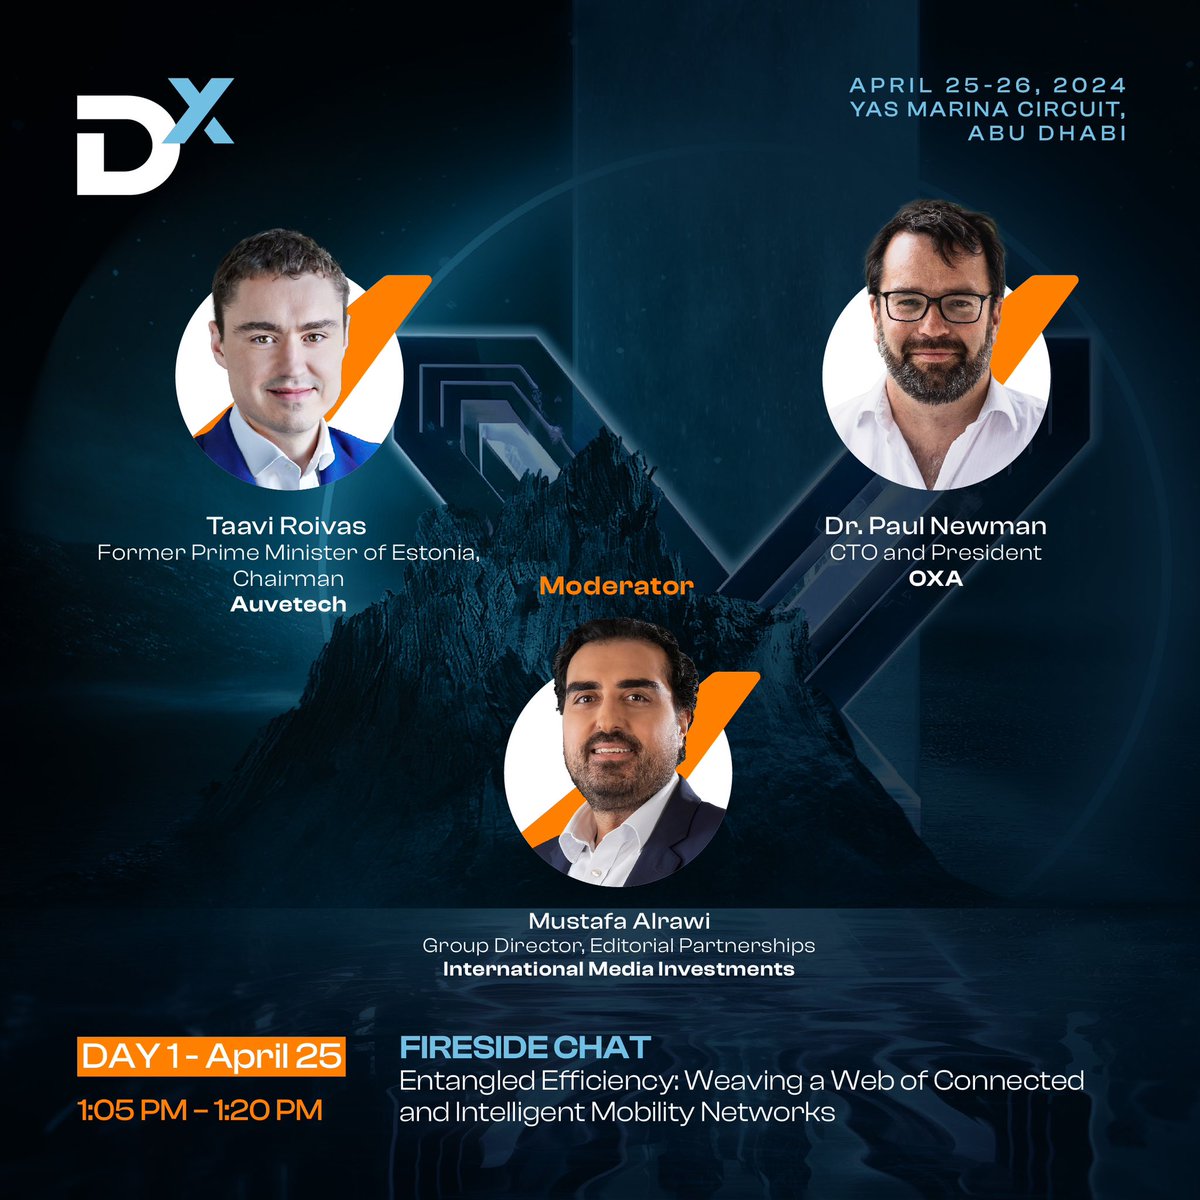 Get ready for an electrifying Fireside Chat about Weaving a Web of Connected and Intelligent Mobility Networks! Join us as experts discuss the fusion of technology and transportation! @Bayanatg42 @InvestAbuDhabi @saviabudhabi @AbuDhabiDMT